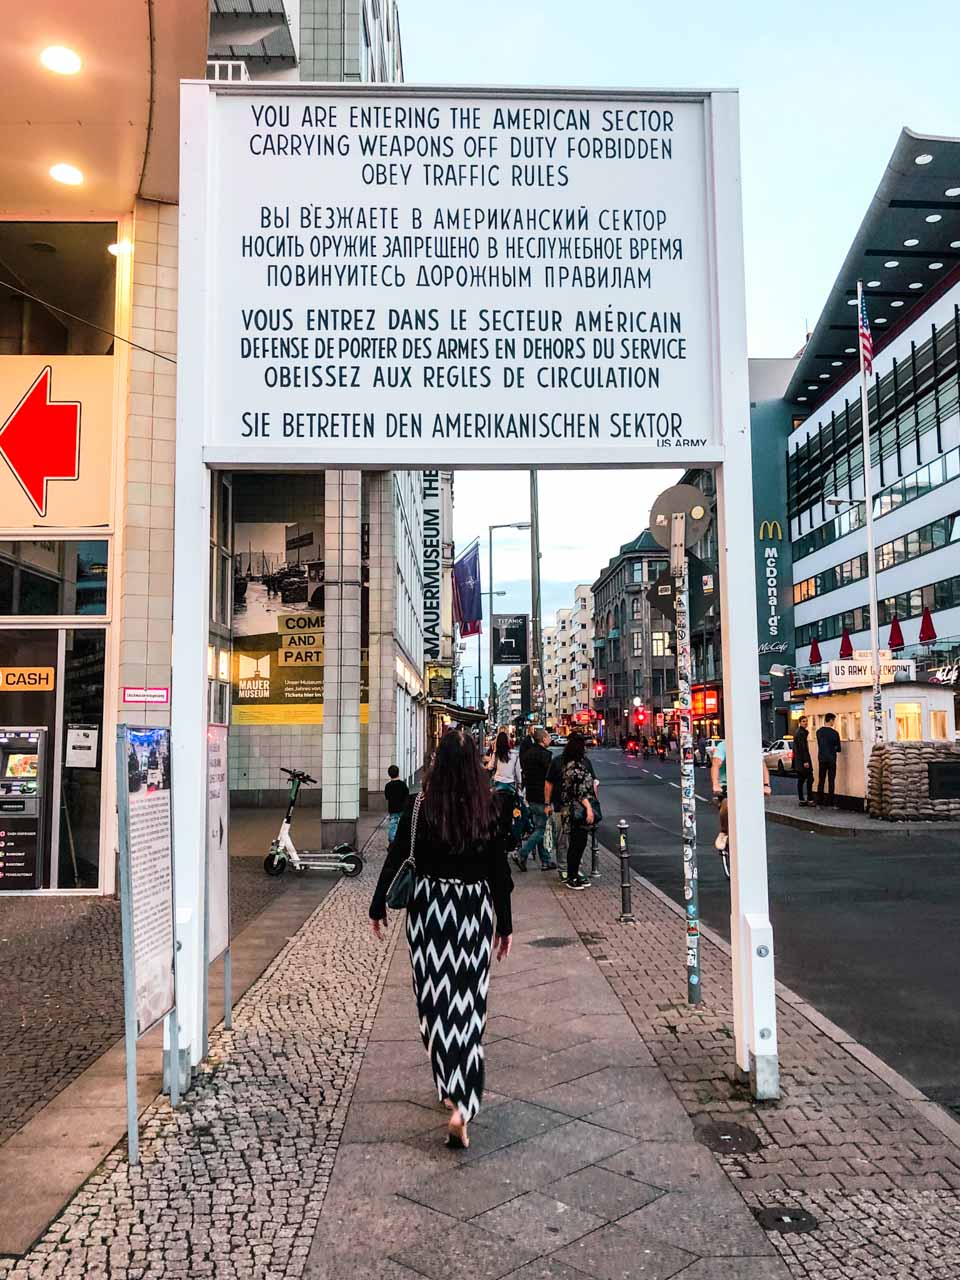 A girl in a maxi dress walking under the famous sign at Checkpoint Charlie in Berlin that says "You are entering the American sector" in various languages